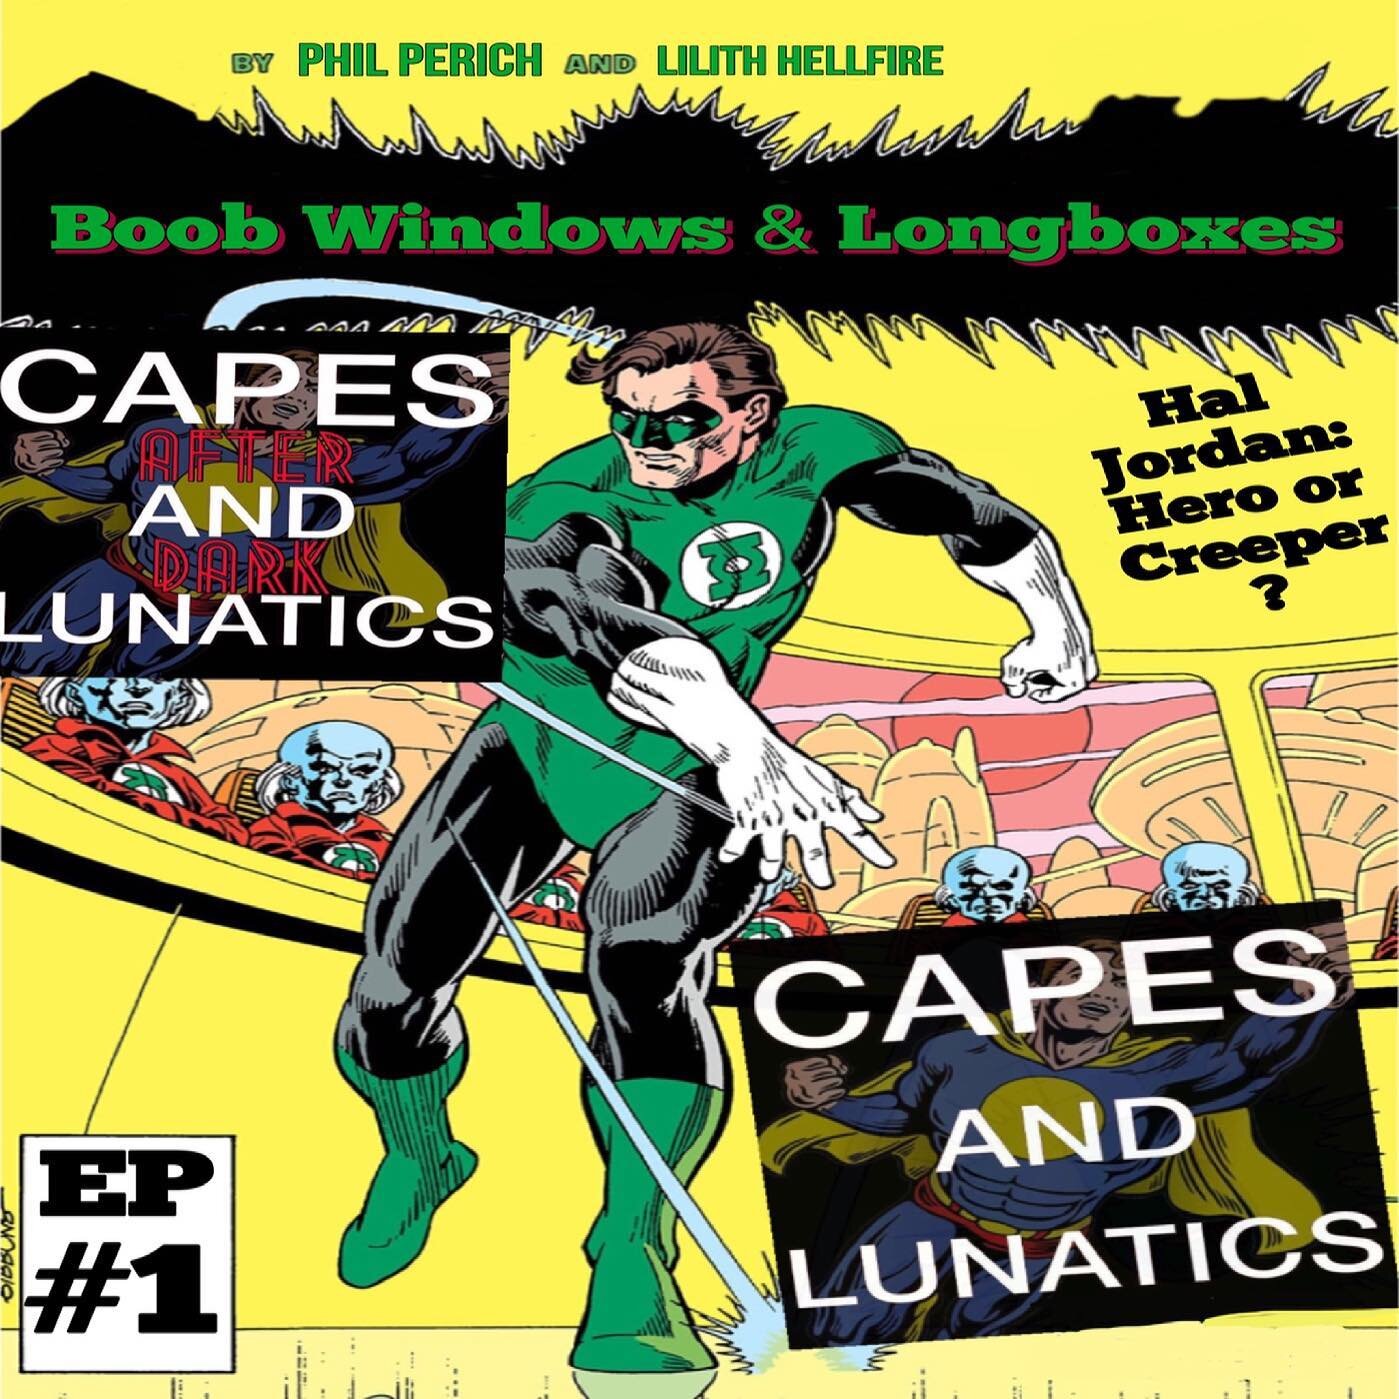 The March #patreon episode is up! Check out Episode 1 of Boob Windows and Longboxes as @nightwingpdp and @lilithhellfire86 review the life and career of #greenlantern #haljordan ! You can listen now for as low as $1. #patreoncreator #dccomics #johnst